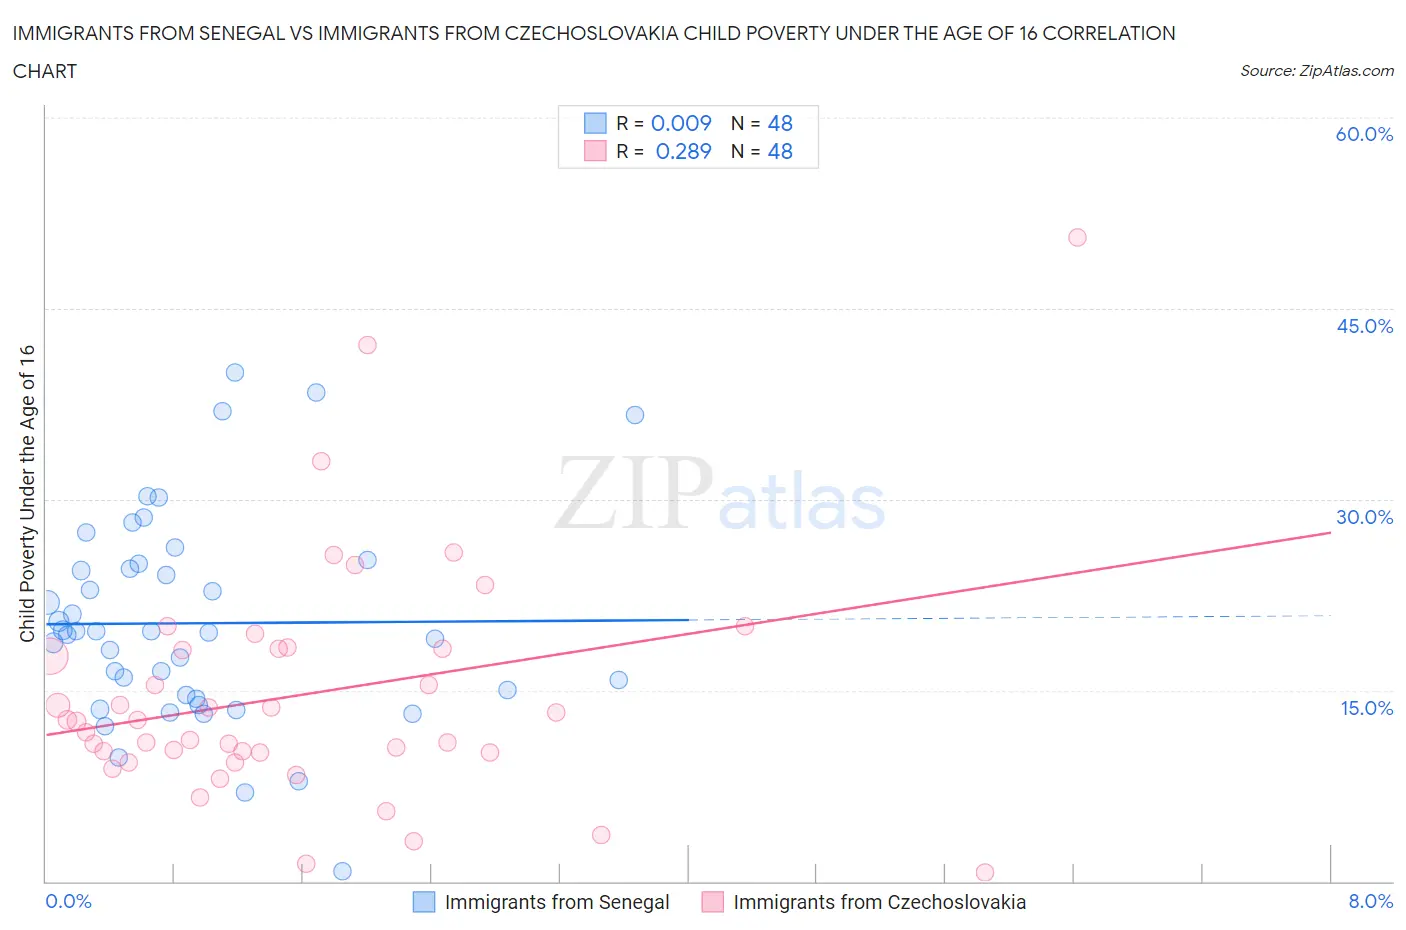 Immigrants from Senegal vs Immigrants from Czechoslovakia Child Poverty Under the Age of 16